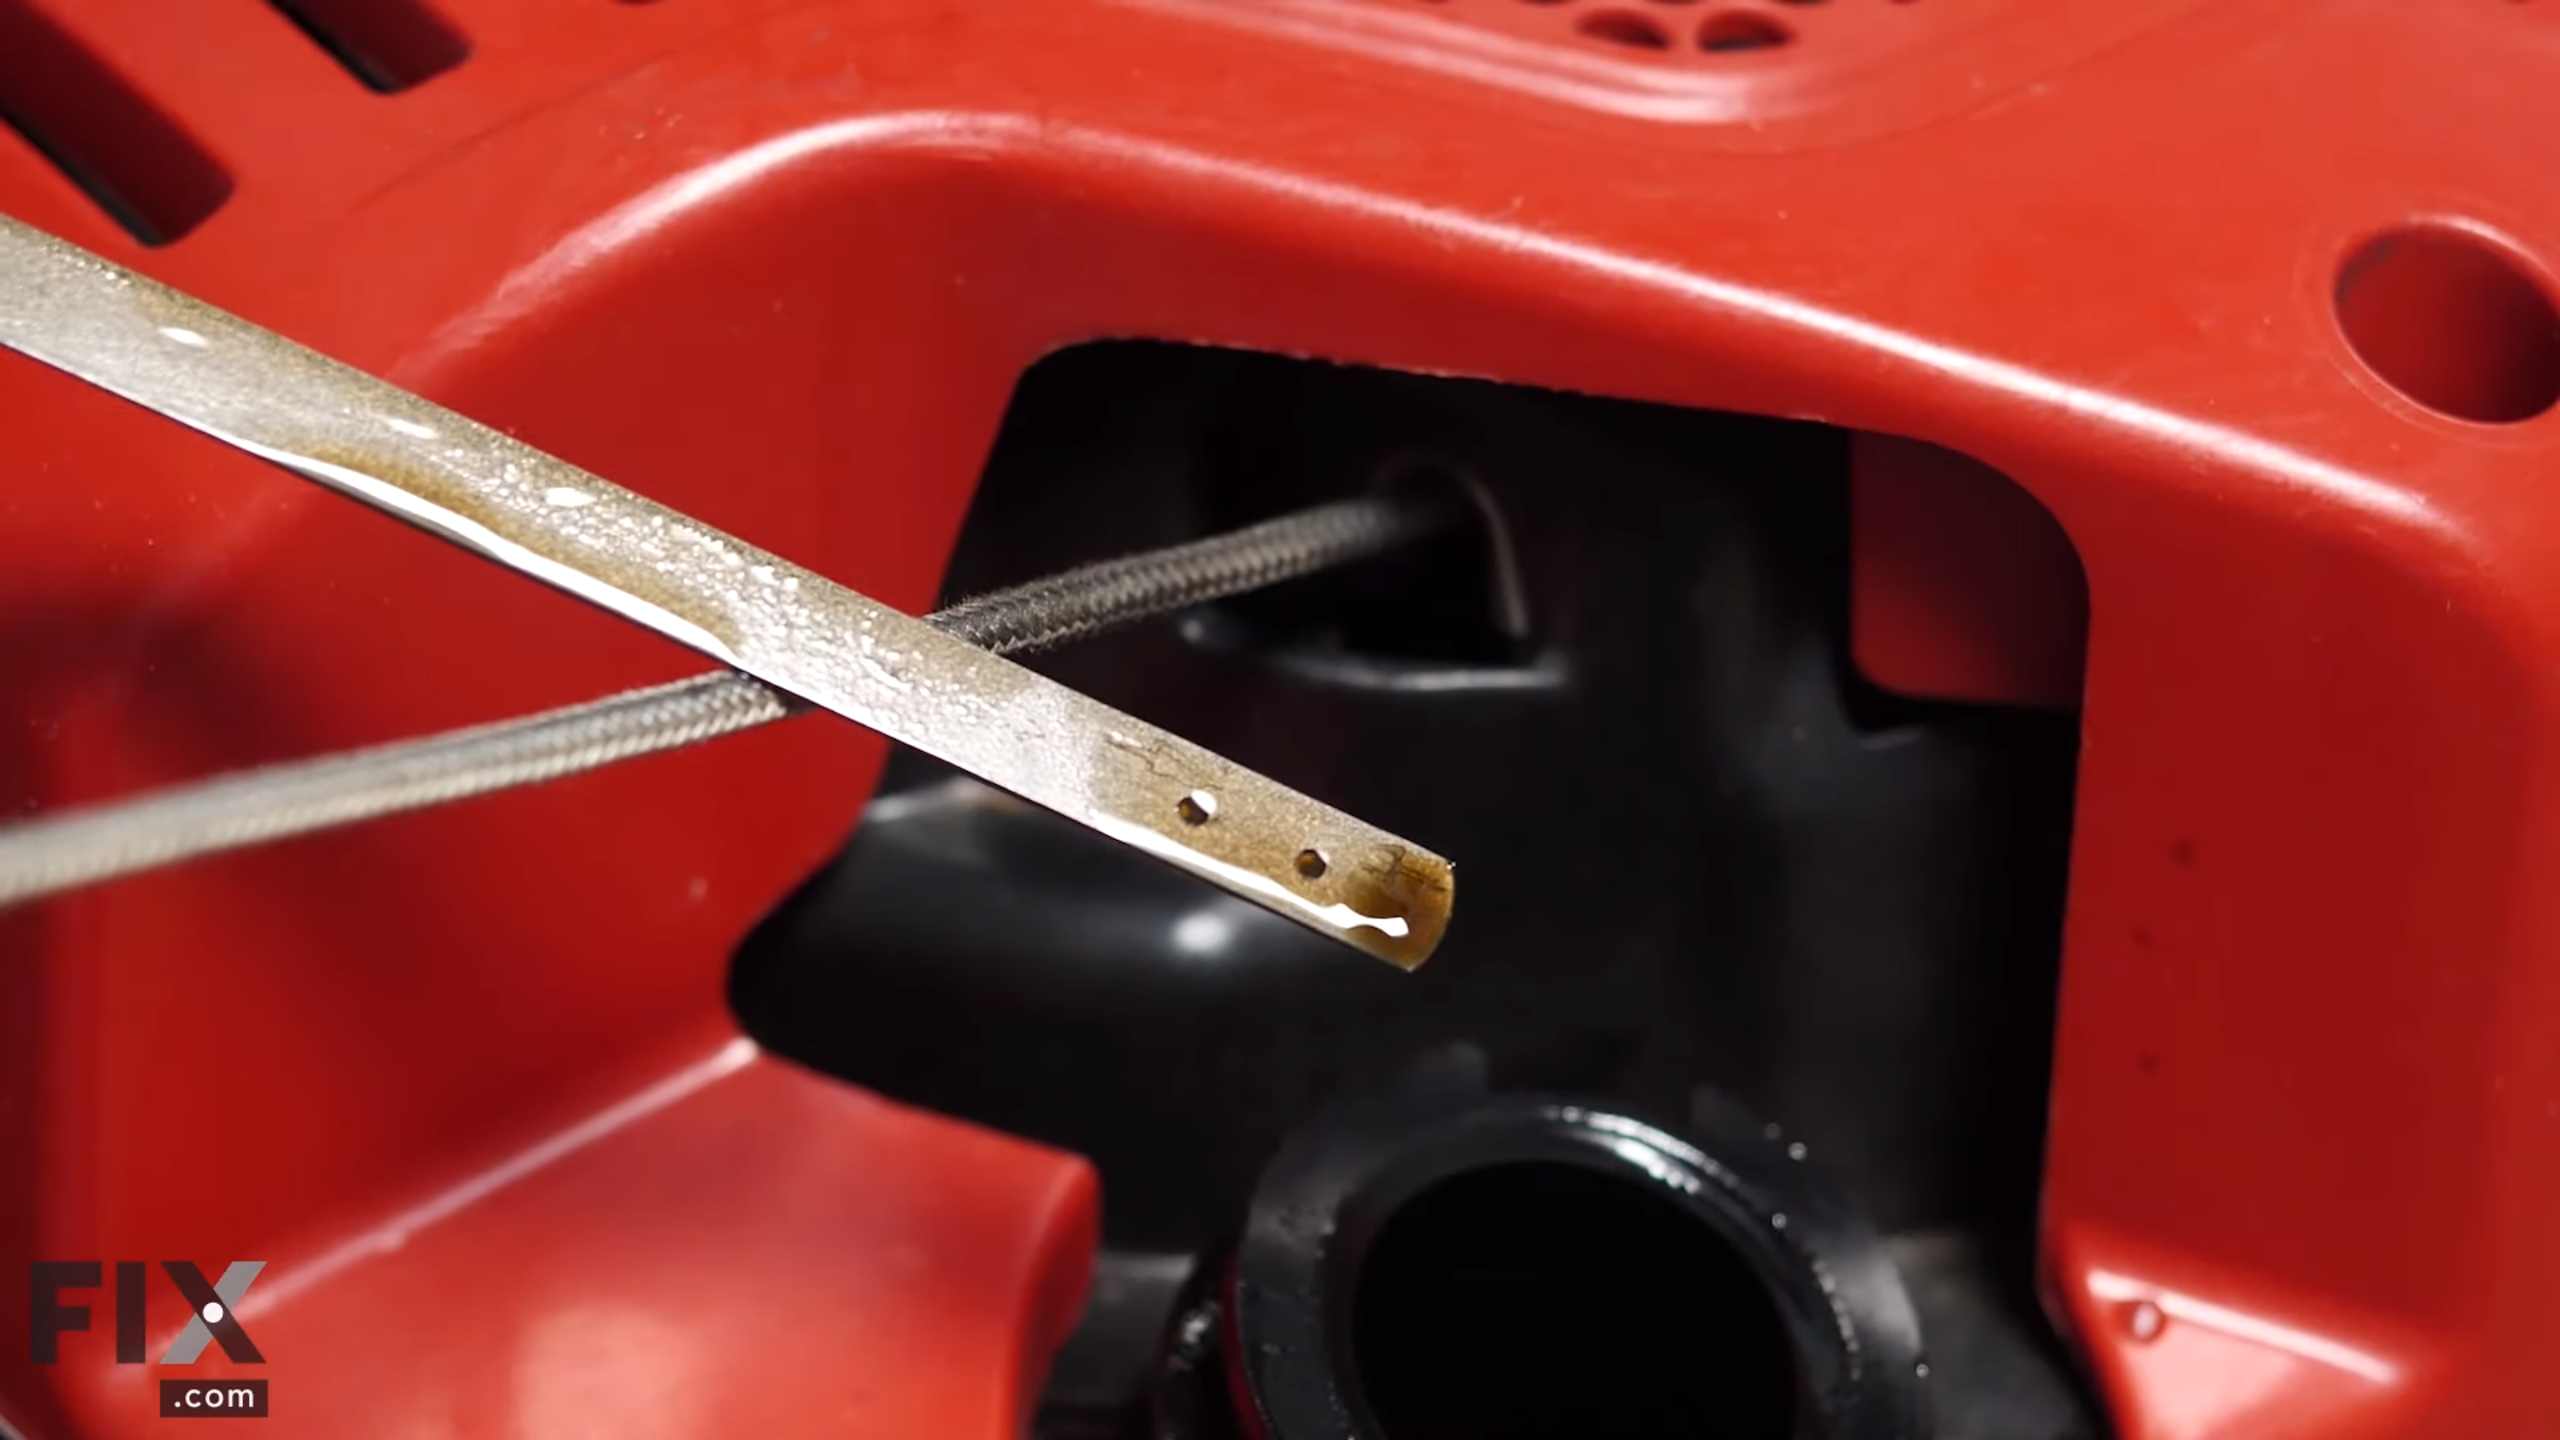 Metal oil dip stick in front of red lawn mower engine